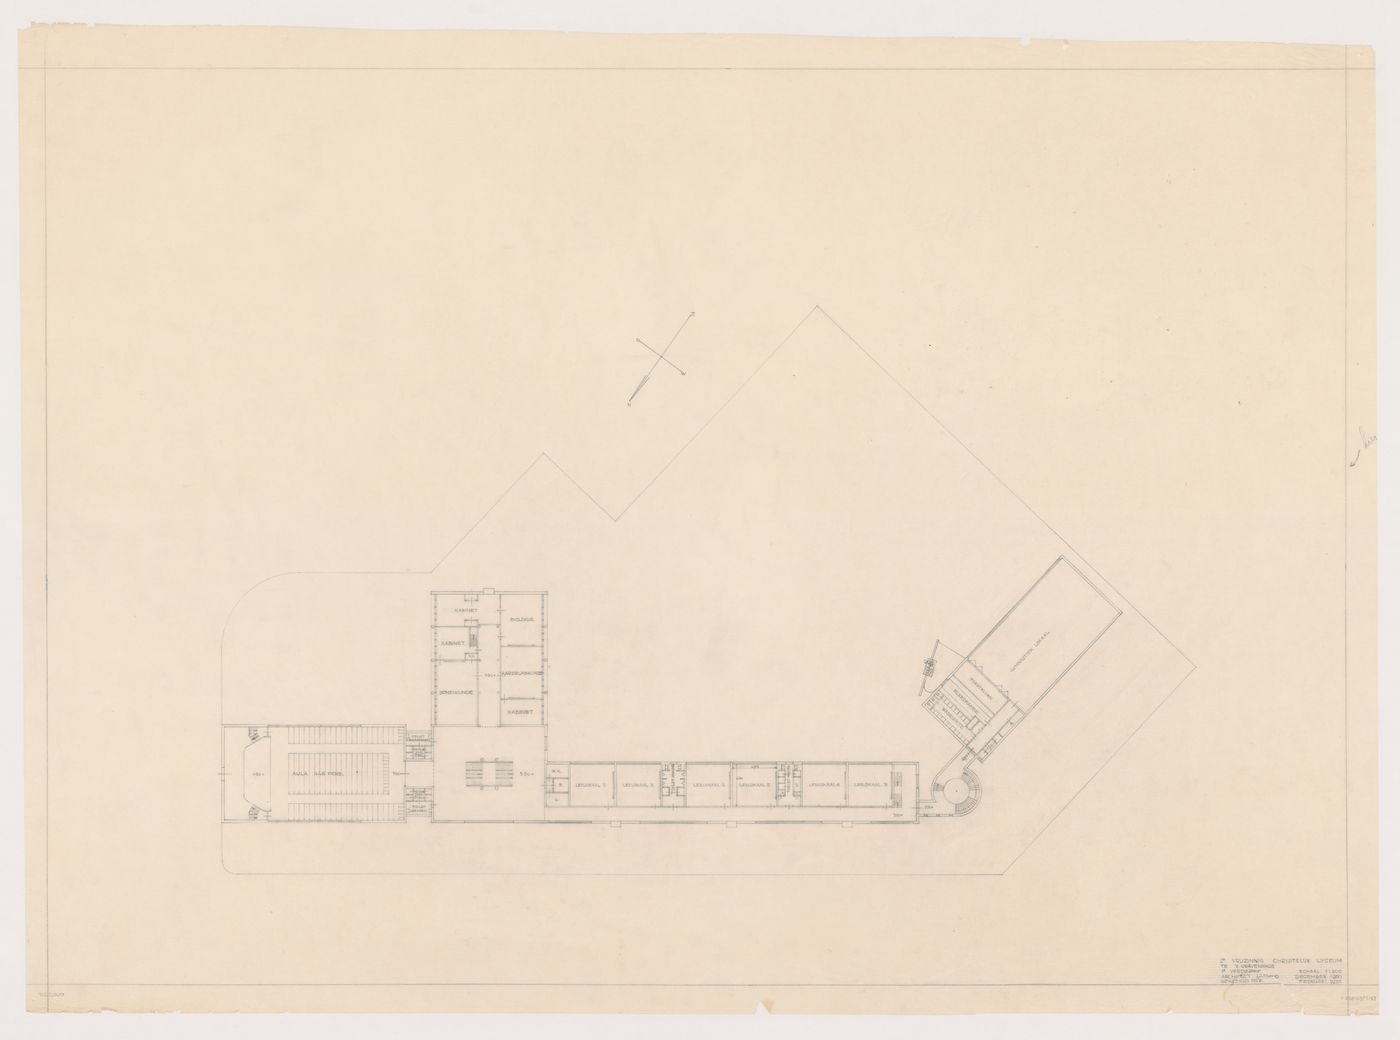 First floor plan for the Second Liberal Christian Lyceum, The Hague, Netherlands